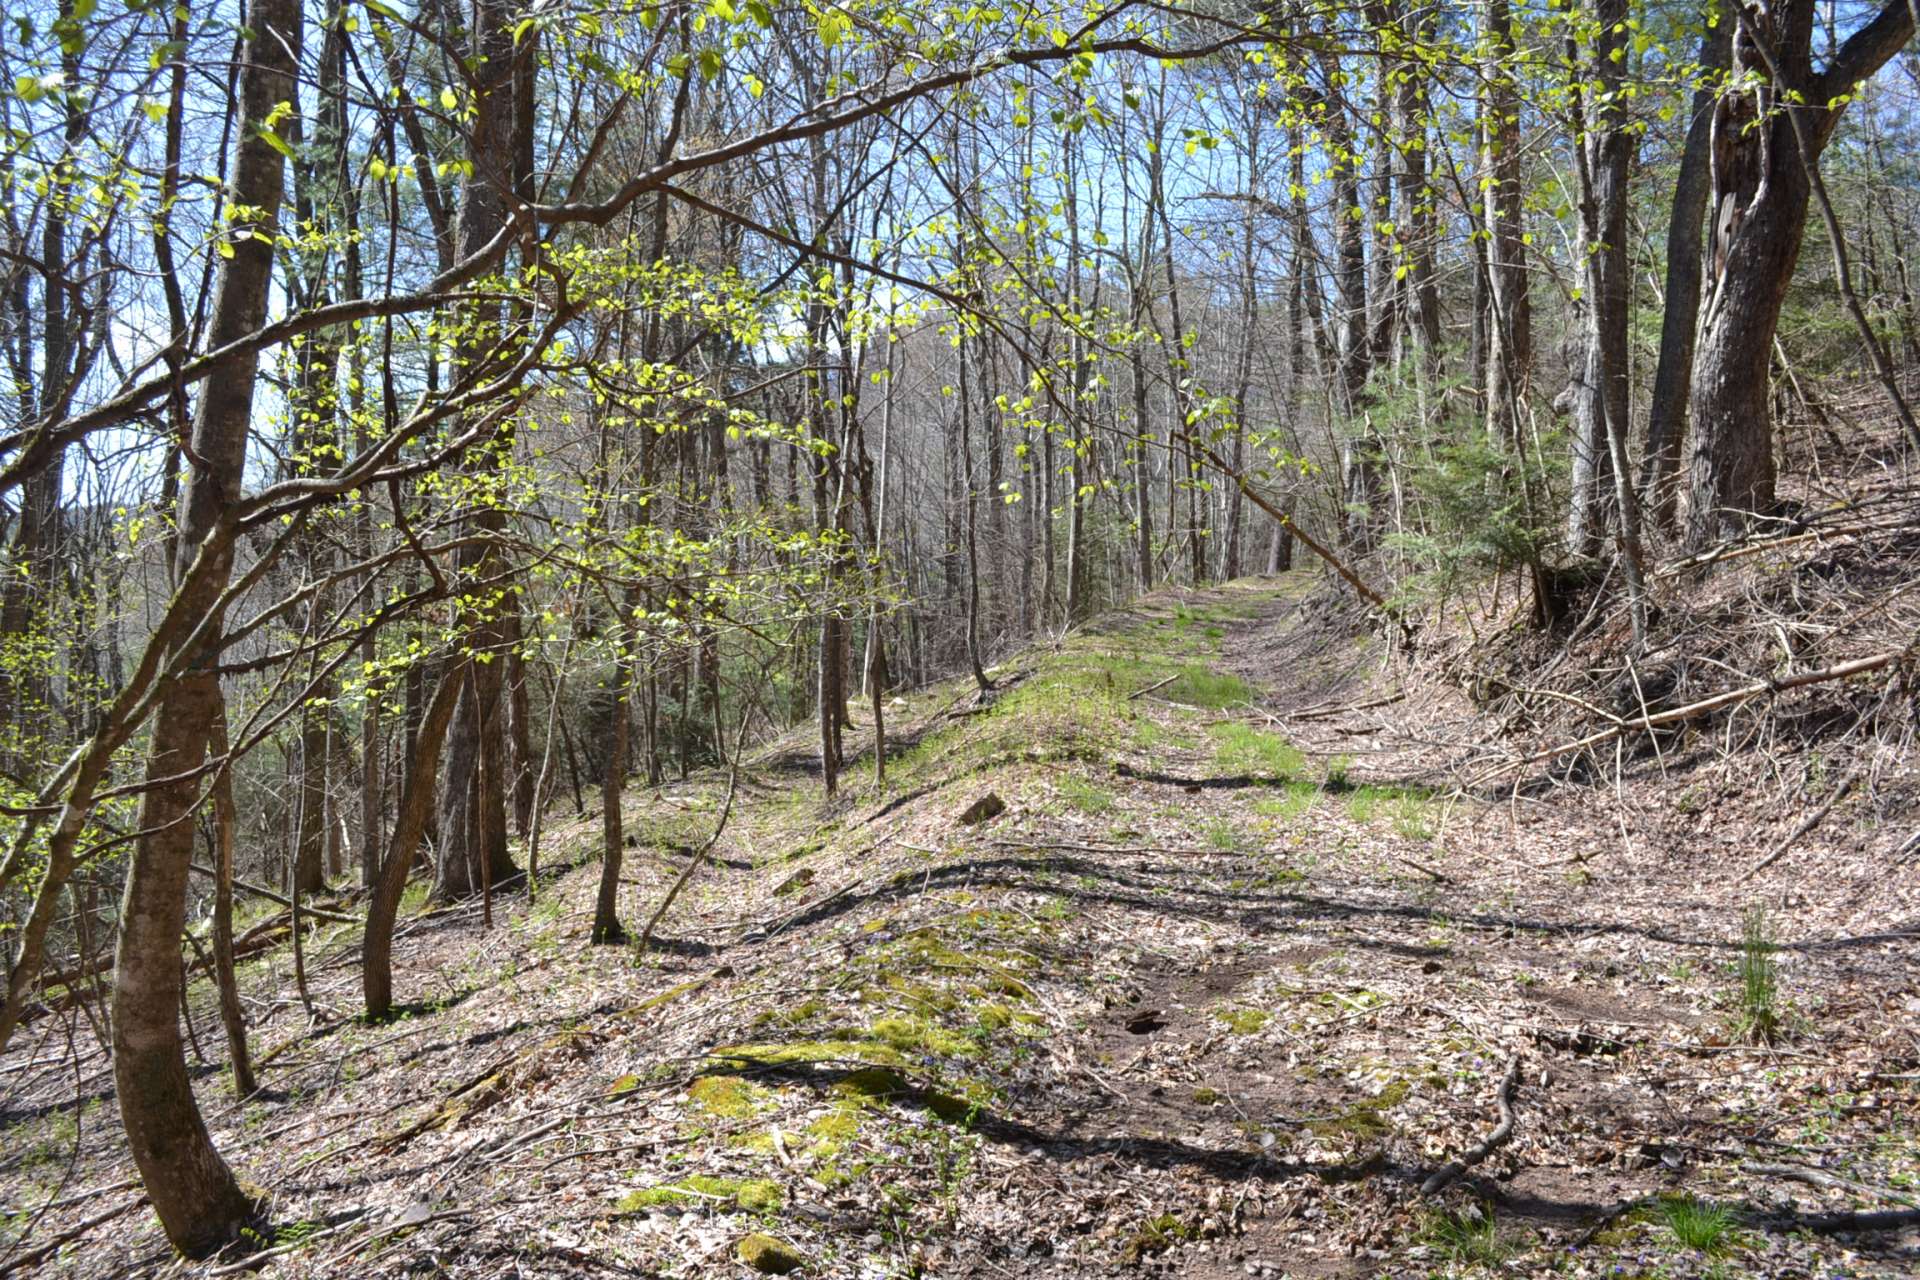 The interior roads are great for hiking, ATVs, or horseback riding.  This property is also offered in separate tracts.  Two 35 acre tracts are offered individually at $122,500 each.  And a 2.88 acre tract is offered separately at $25,000.  Call for more details on the divisions.